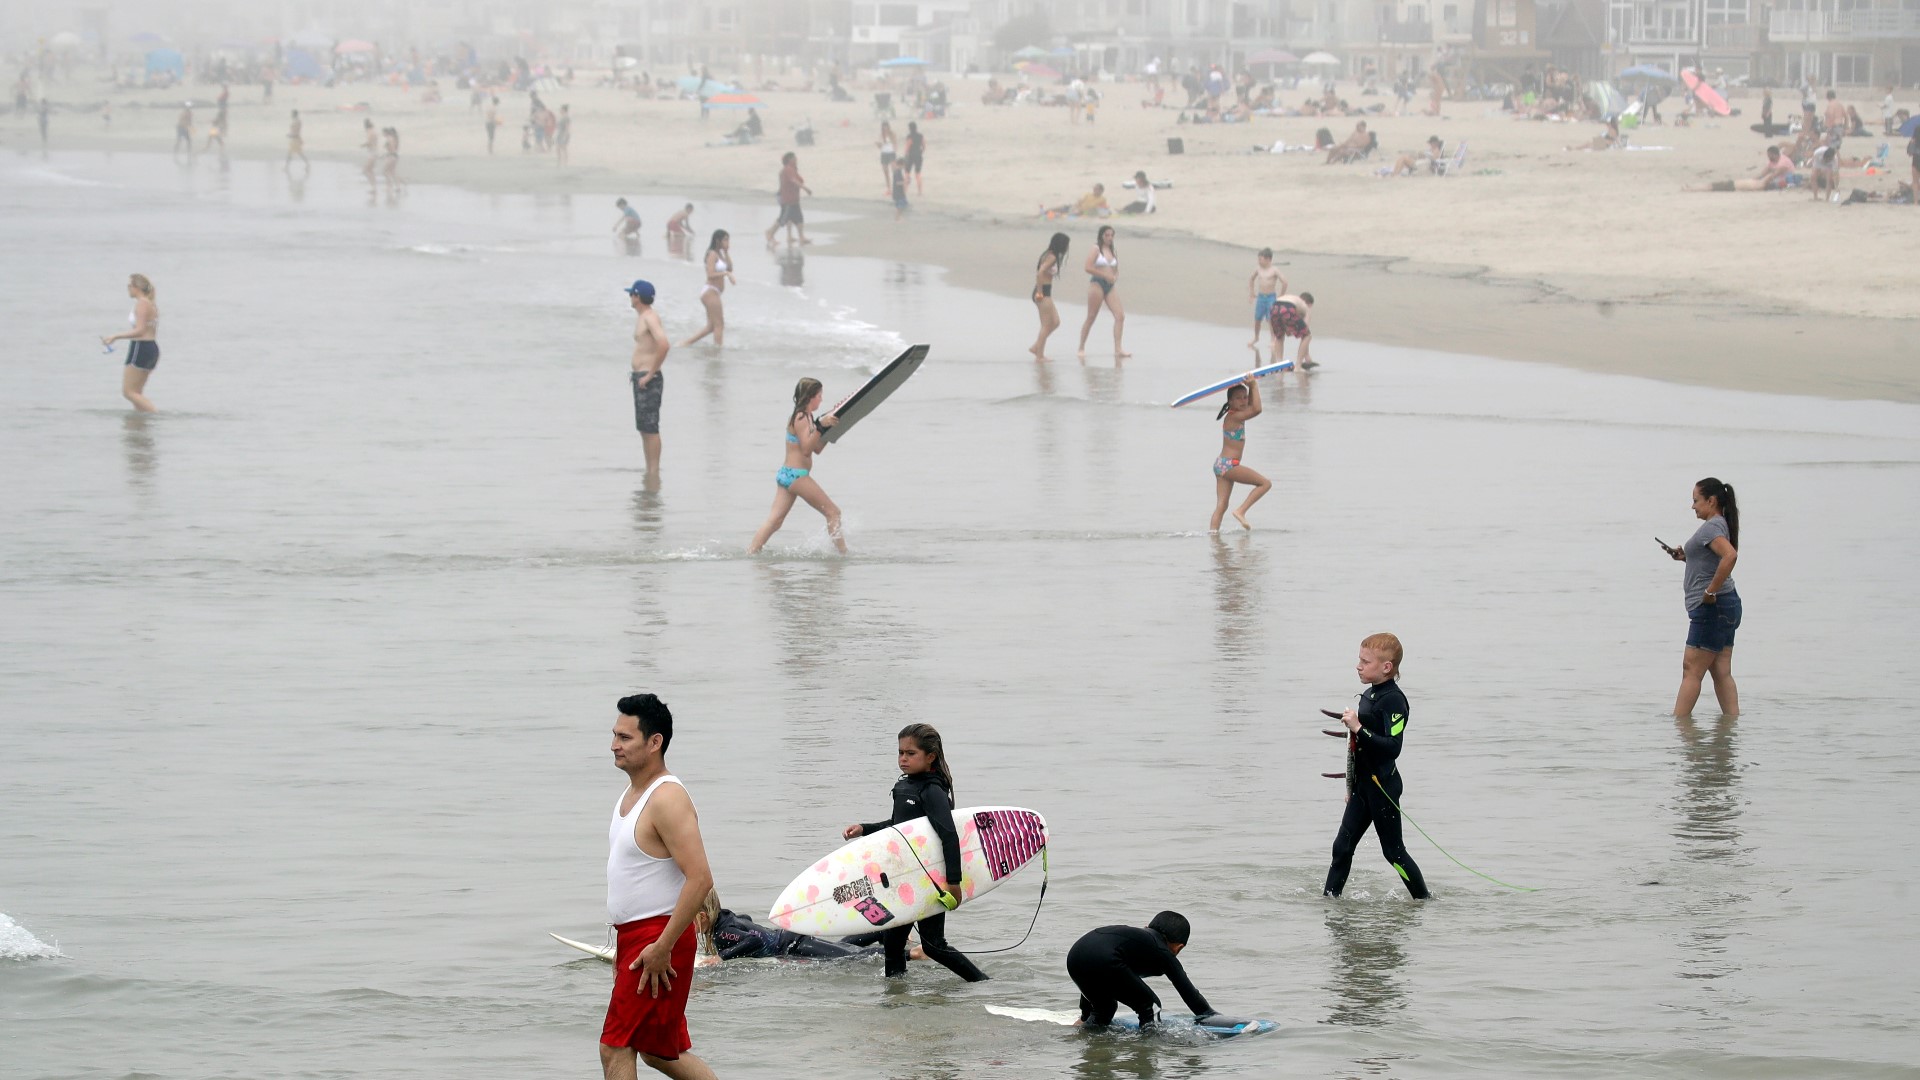 A memo was sent to police around California that gave them a heads up to plan for a beach closure announcement from Governor Gavin Newsom.